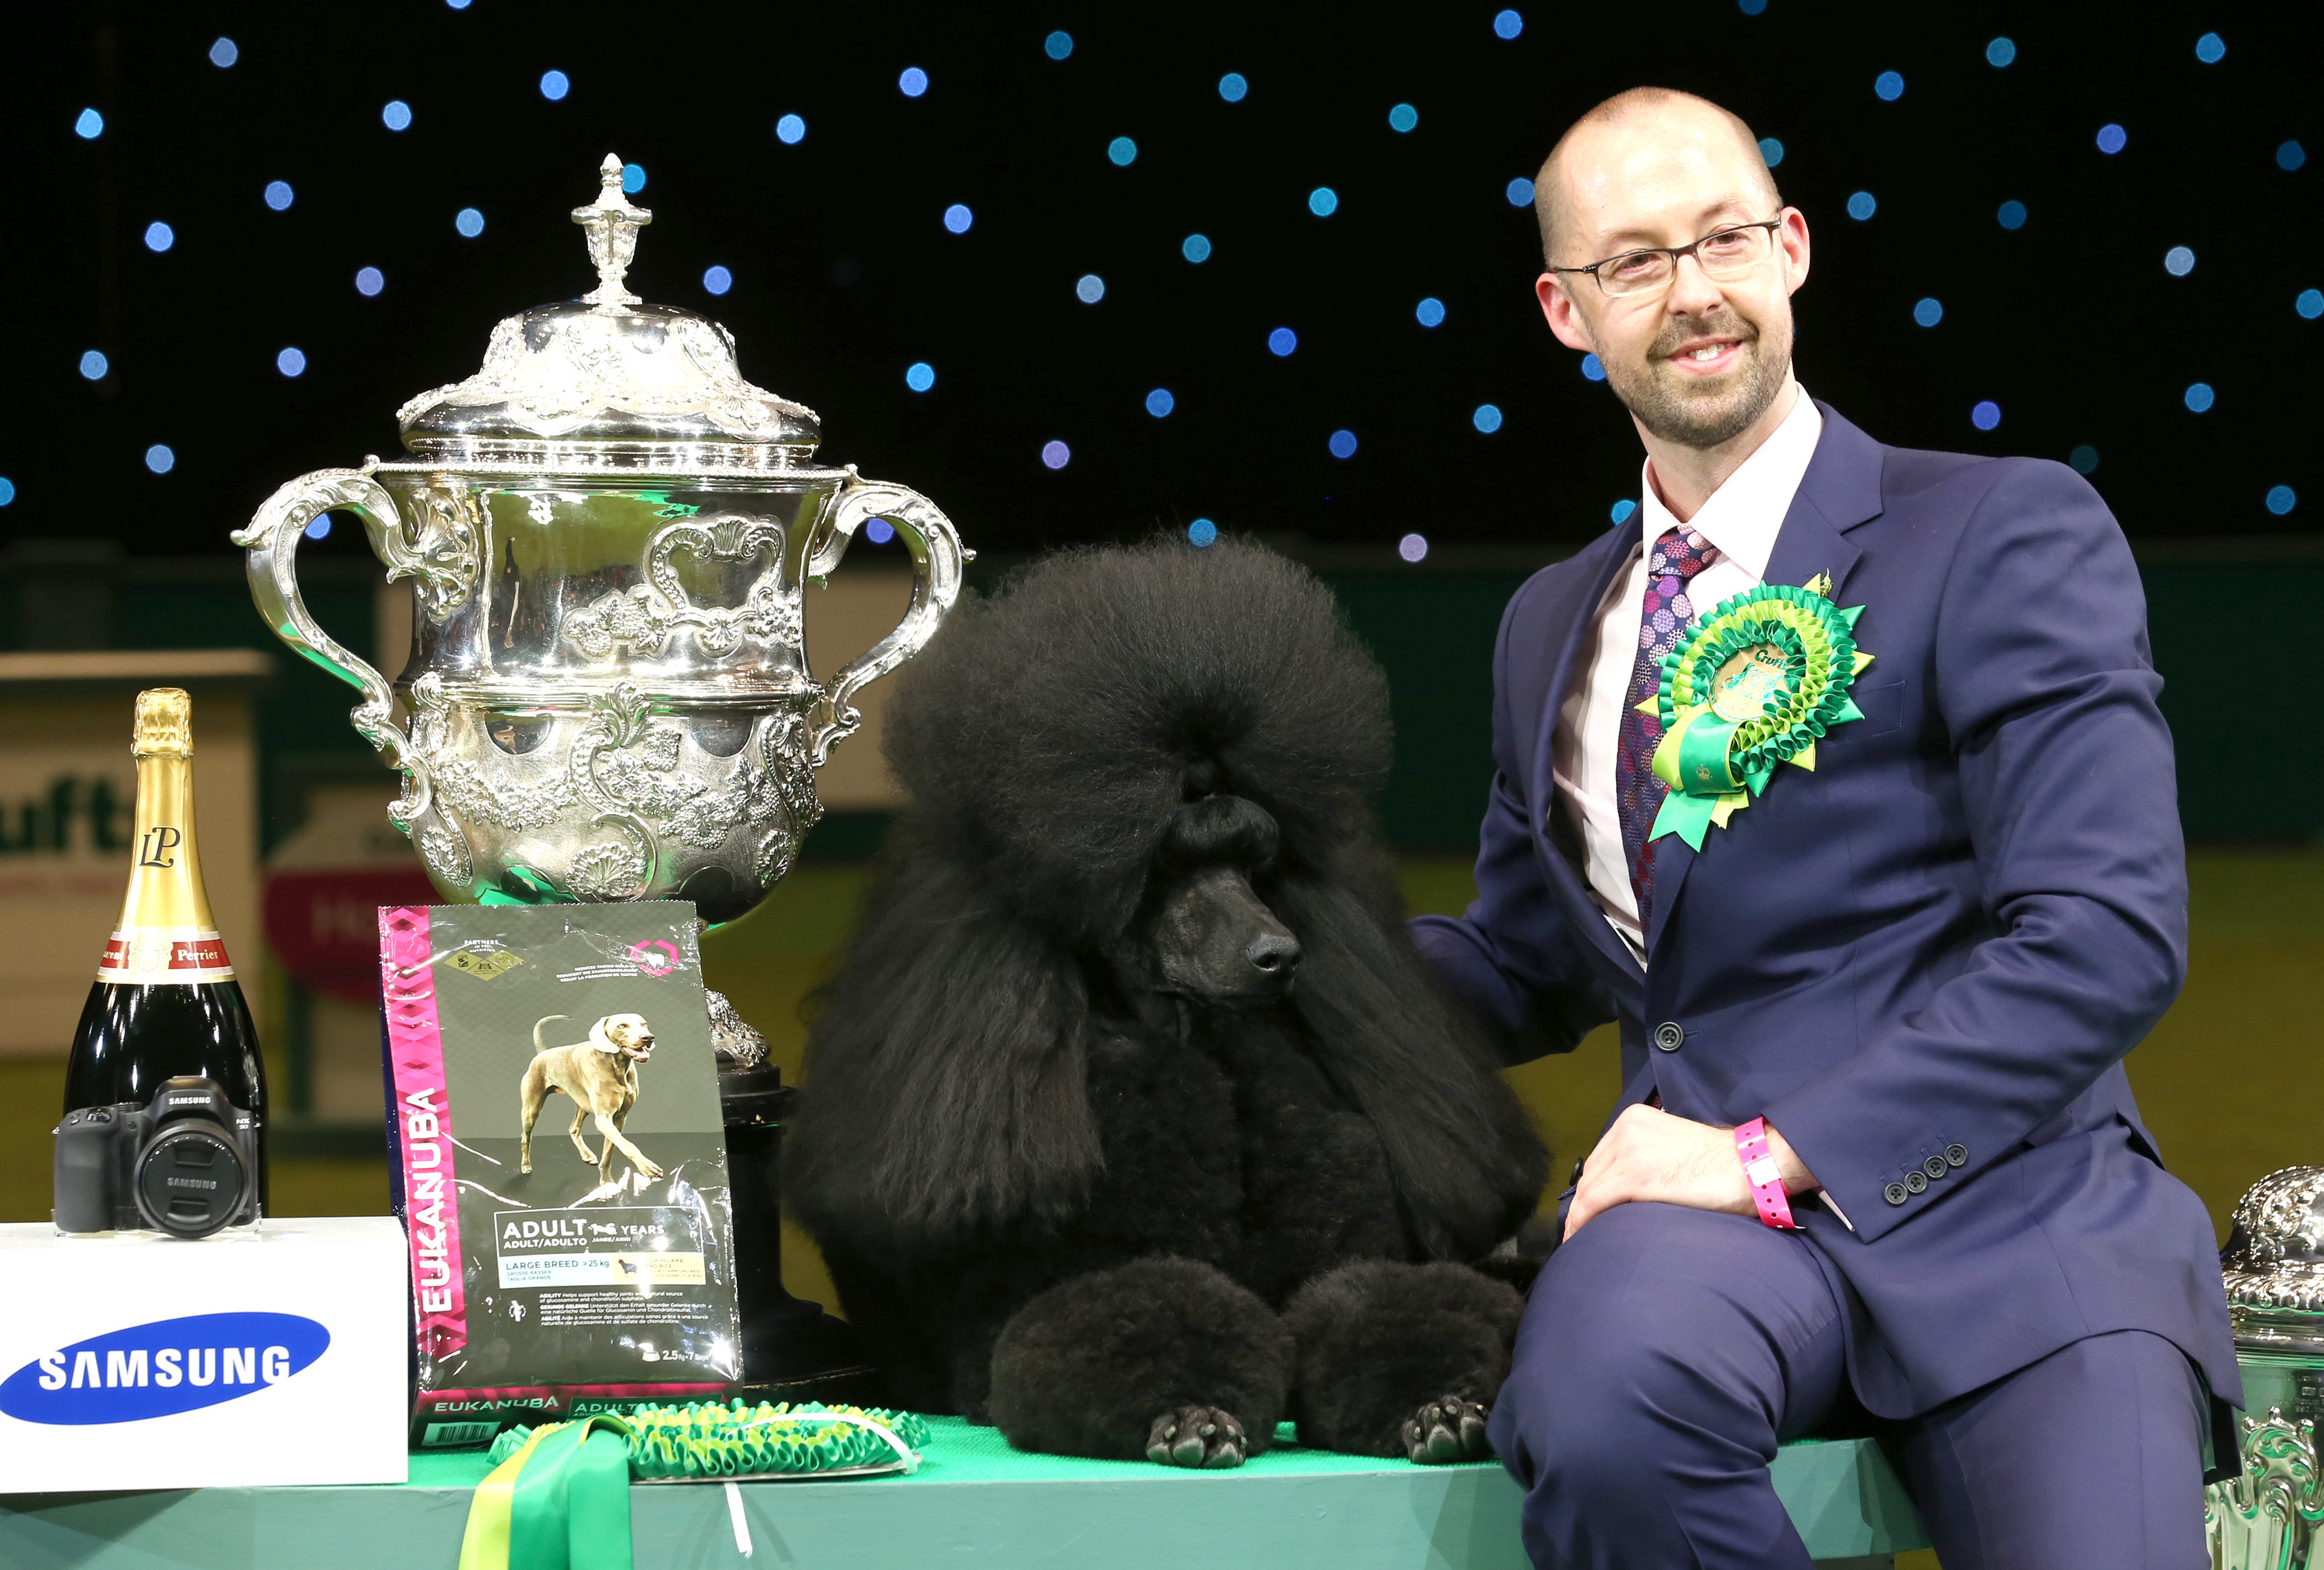 BIRMINGHAM, ENGLAND - MARCH 09:Jason Lynn with Ricky the Standard Poodle, as they celebrate winning the Best in Show category of Crufts 2013 during the final day at Crufts Dog Show on March 9